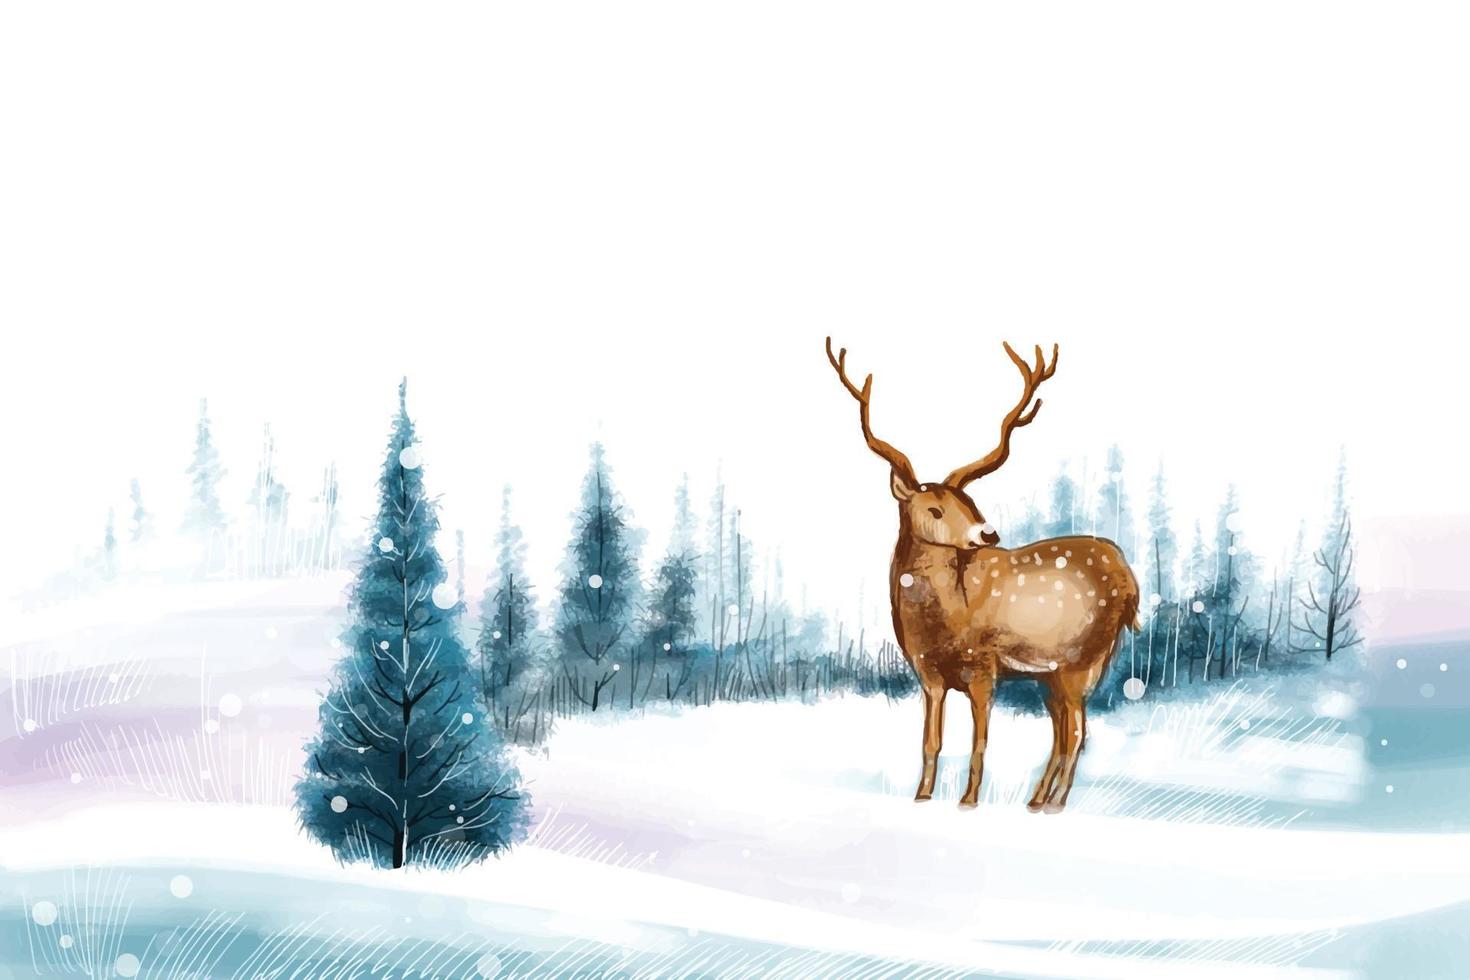 New year and christmas tree winter landscape background with reindeer vector